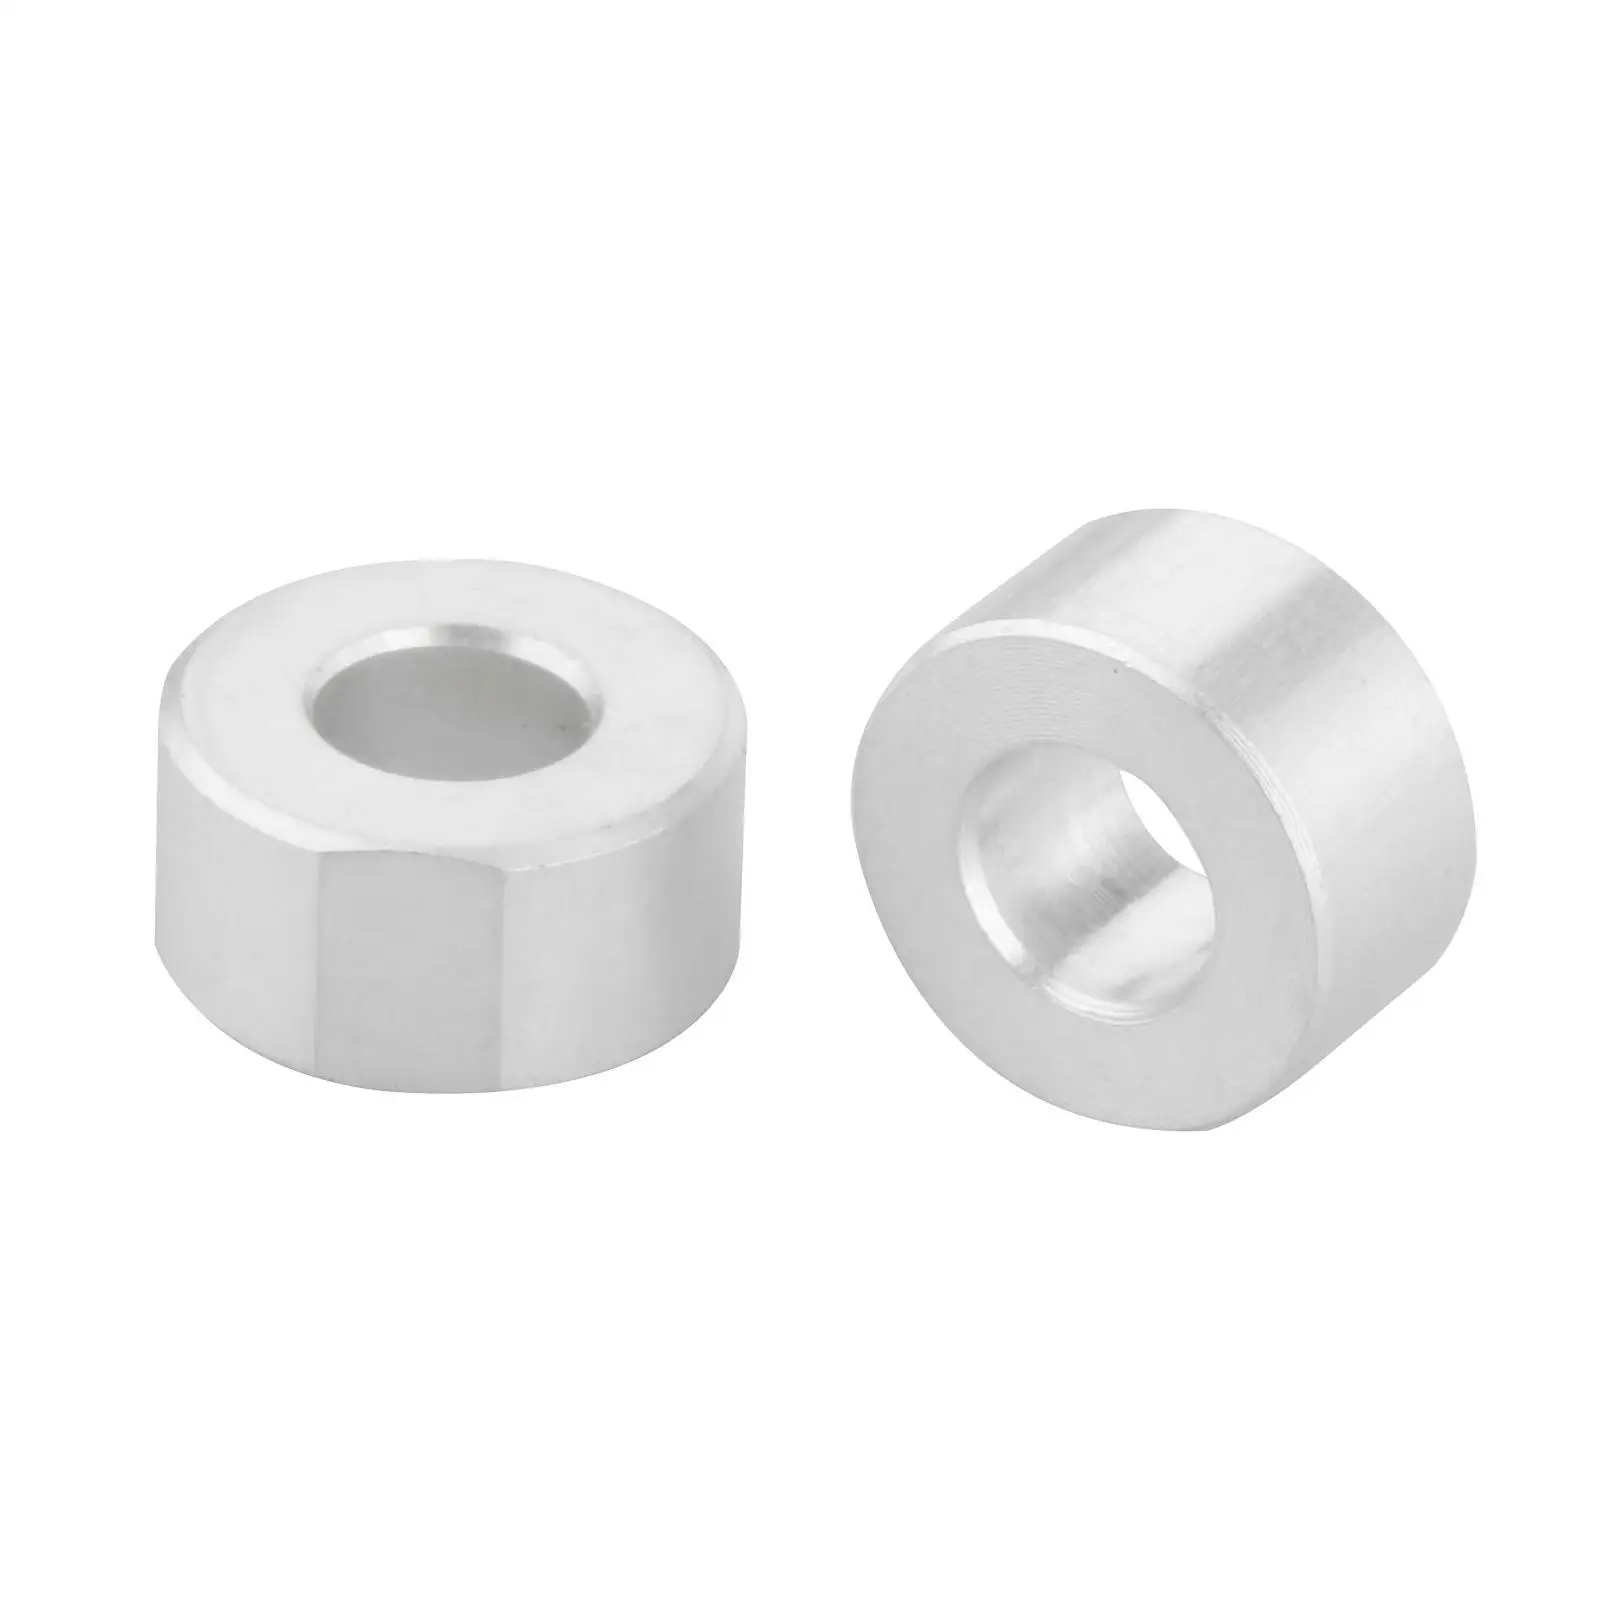 Limiter Bushing 10 & 14 for Msd Pro-Billet Professional Accessories